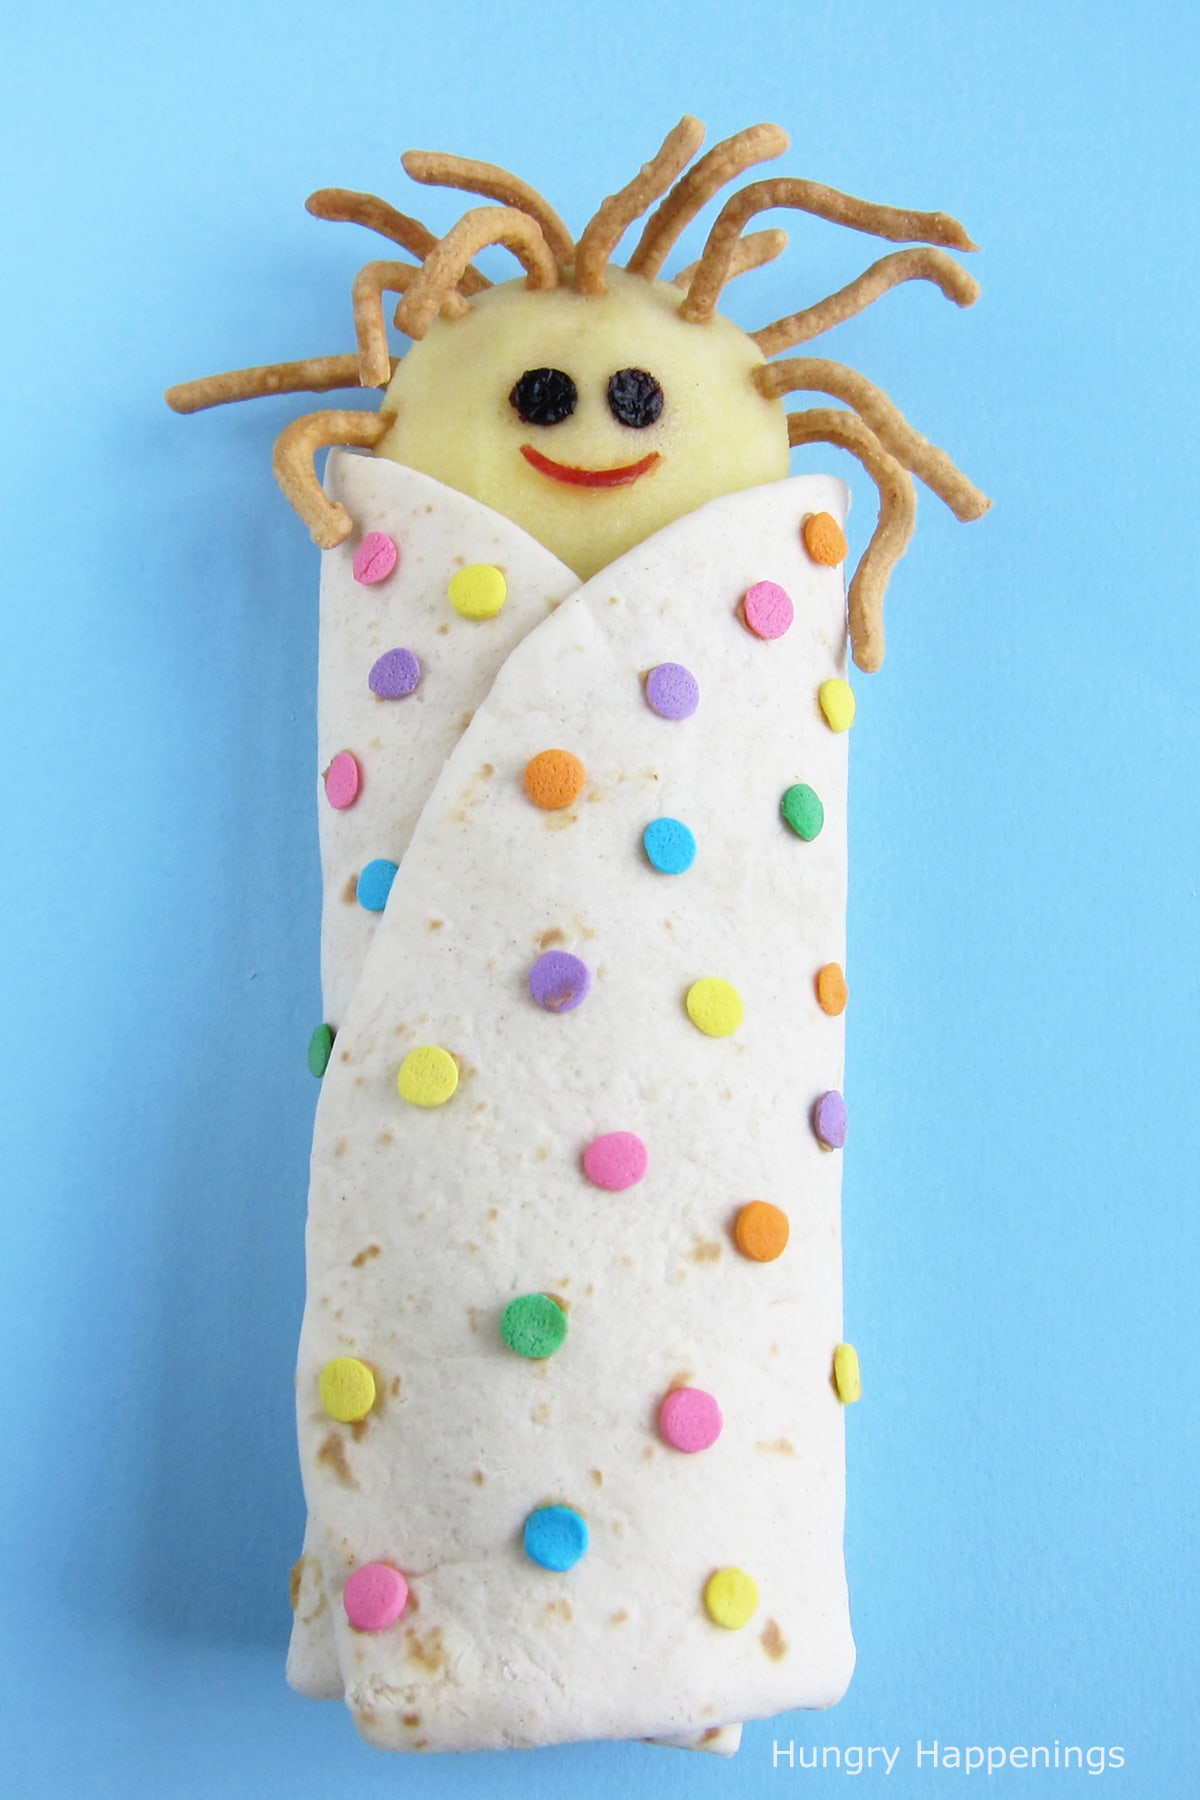 peanut butter and apple wrap decorated like a sleeping bag with an apple kid inside. 